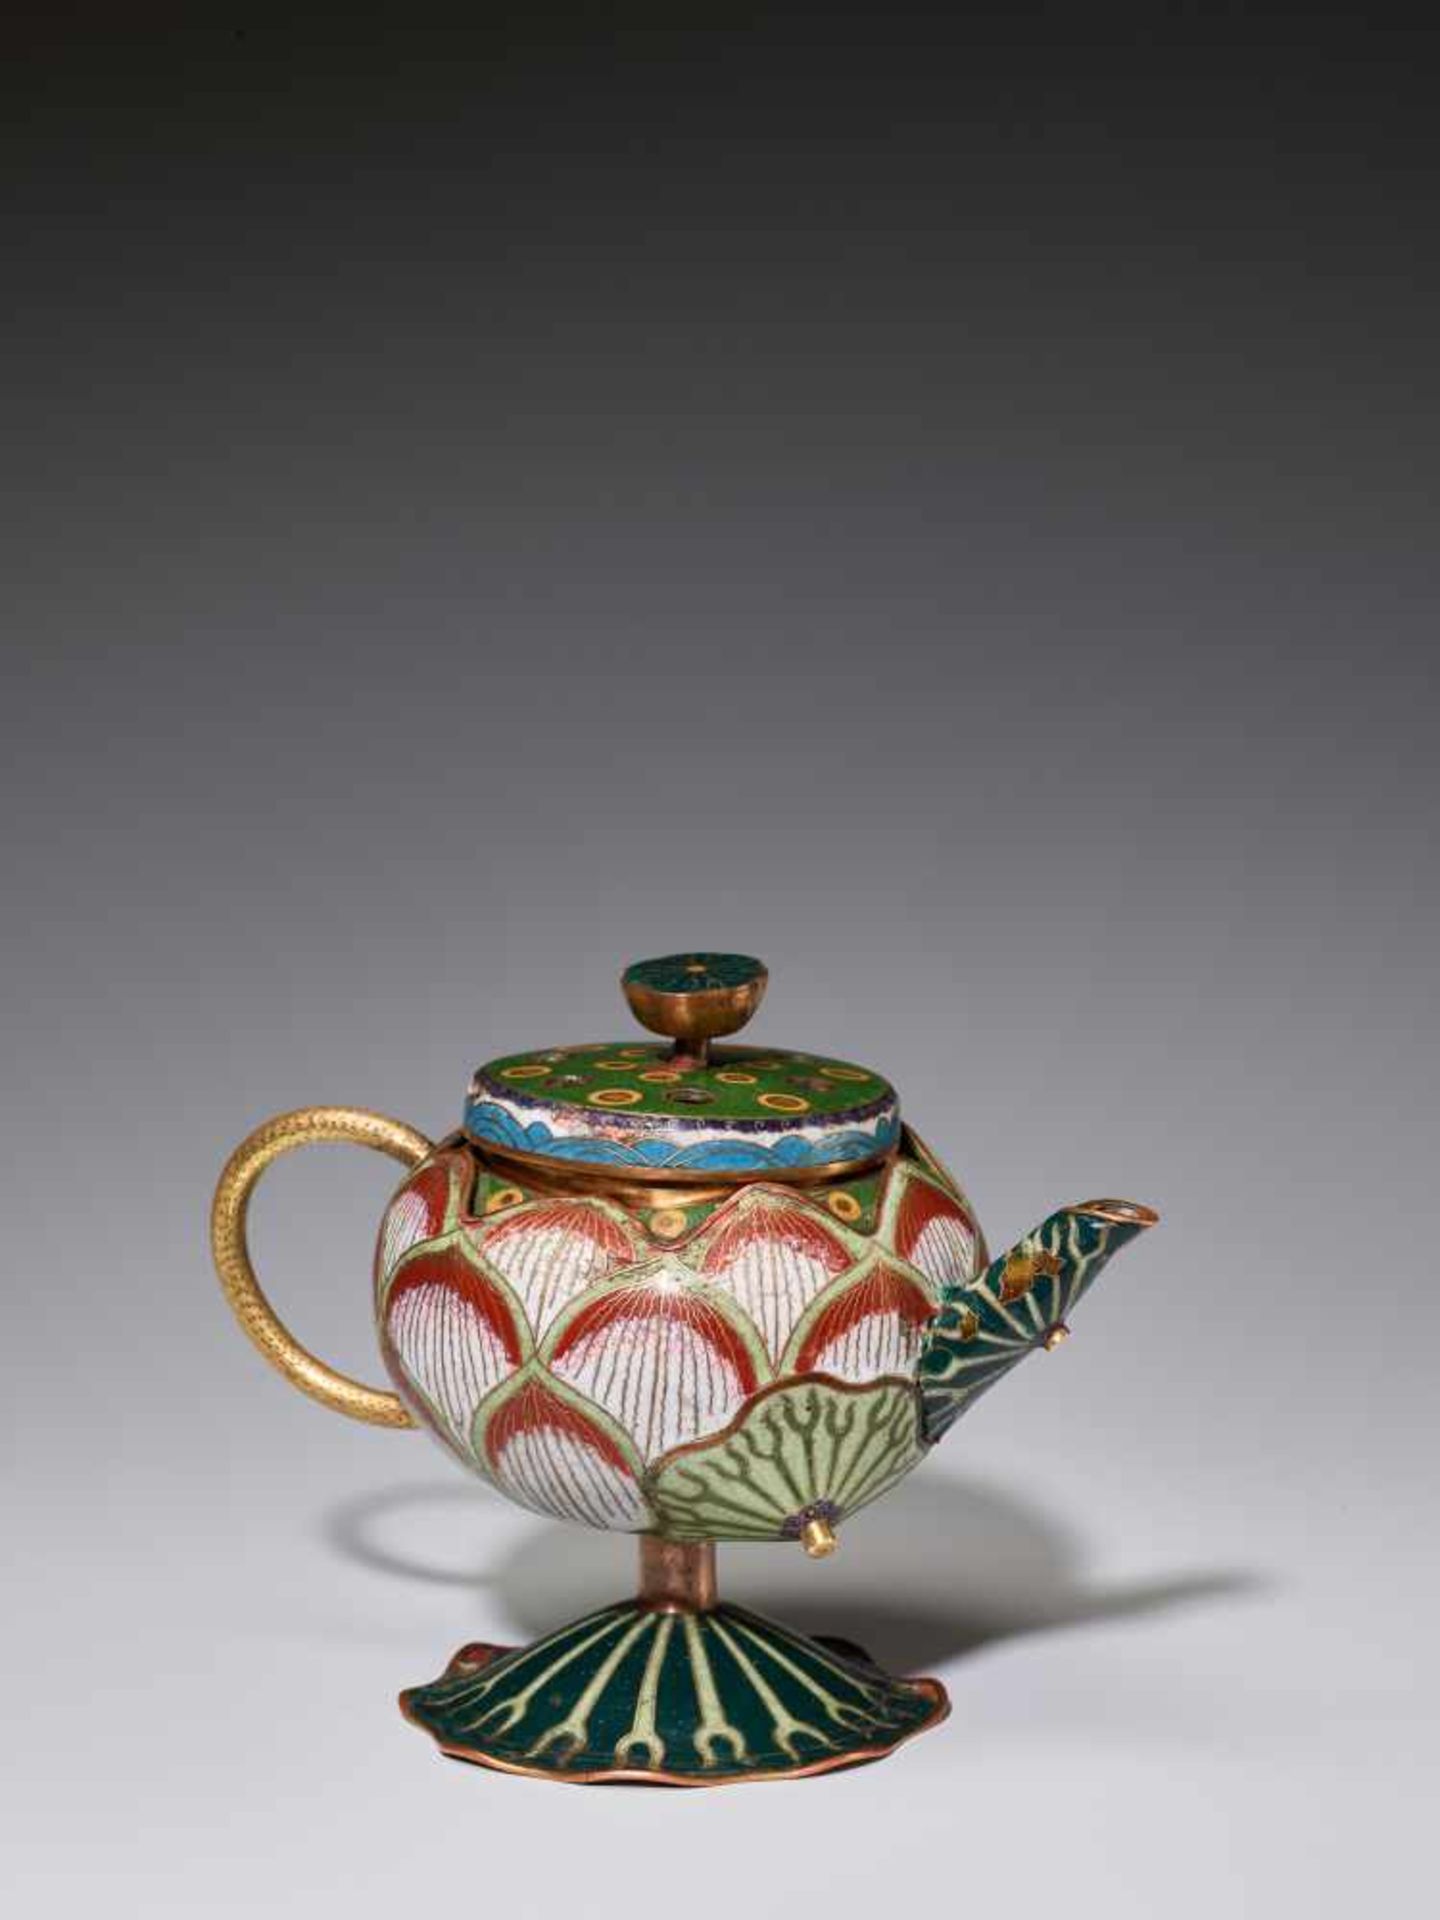 A EXTREMELY RARE CLOISONNE ENAMEL LOTUS-LEAF FORM EWER, 18TH CENTURYFire gilt and incised bronze,